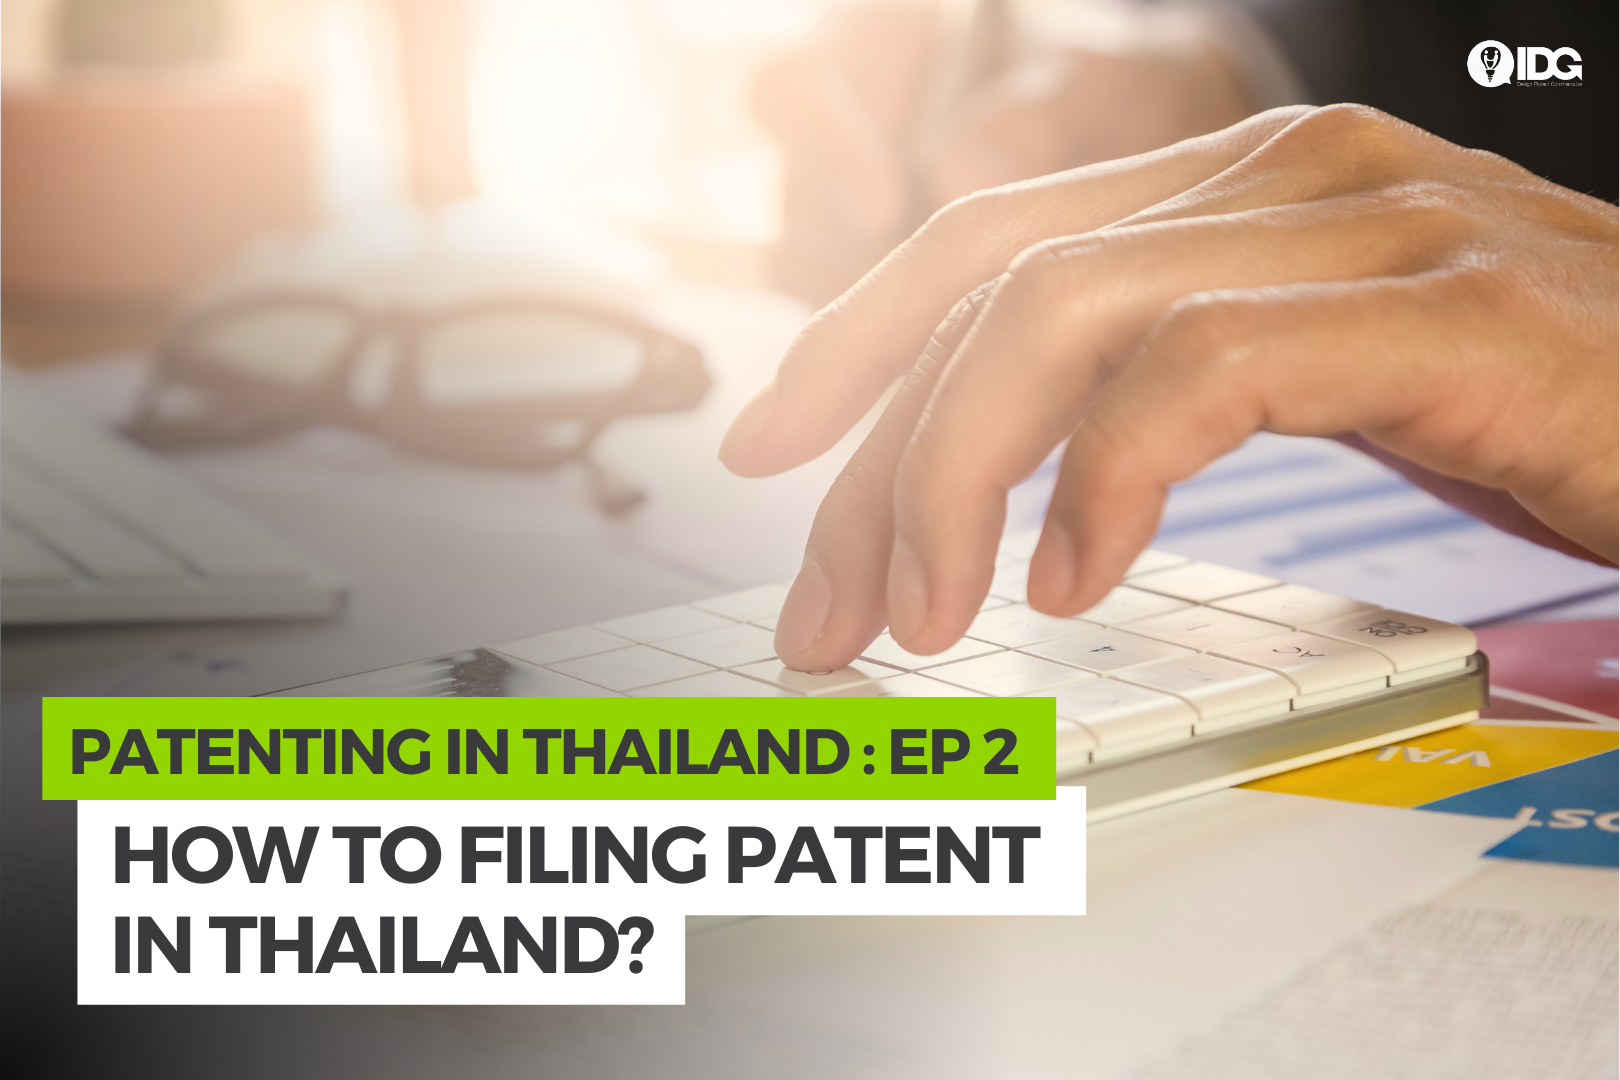 How to Patenting in Thailand